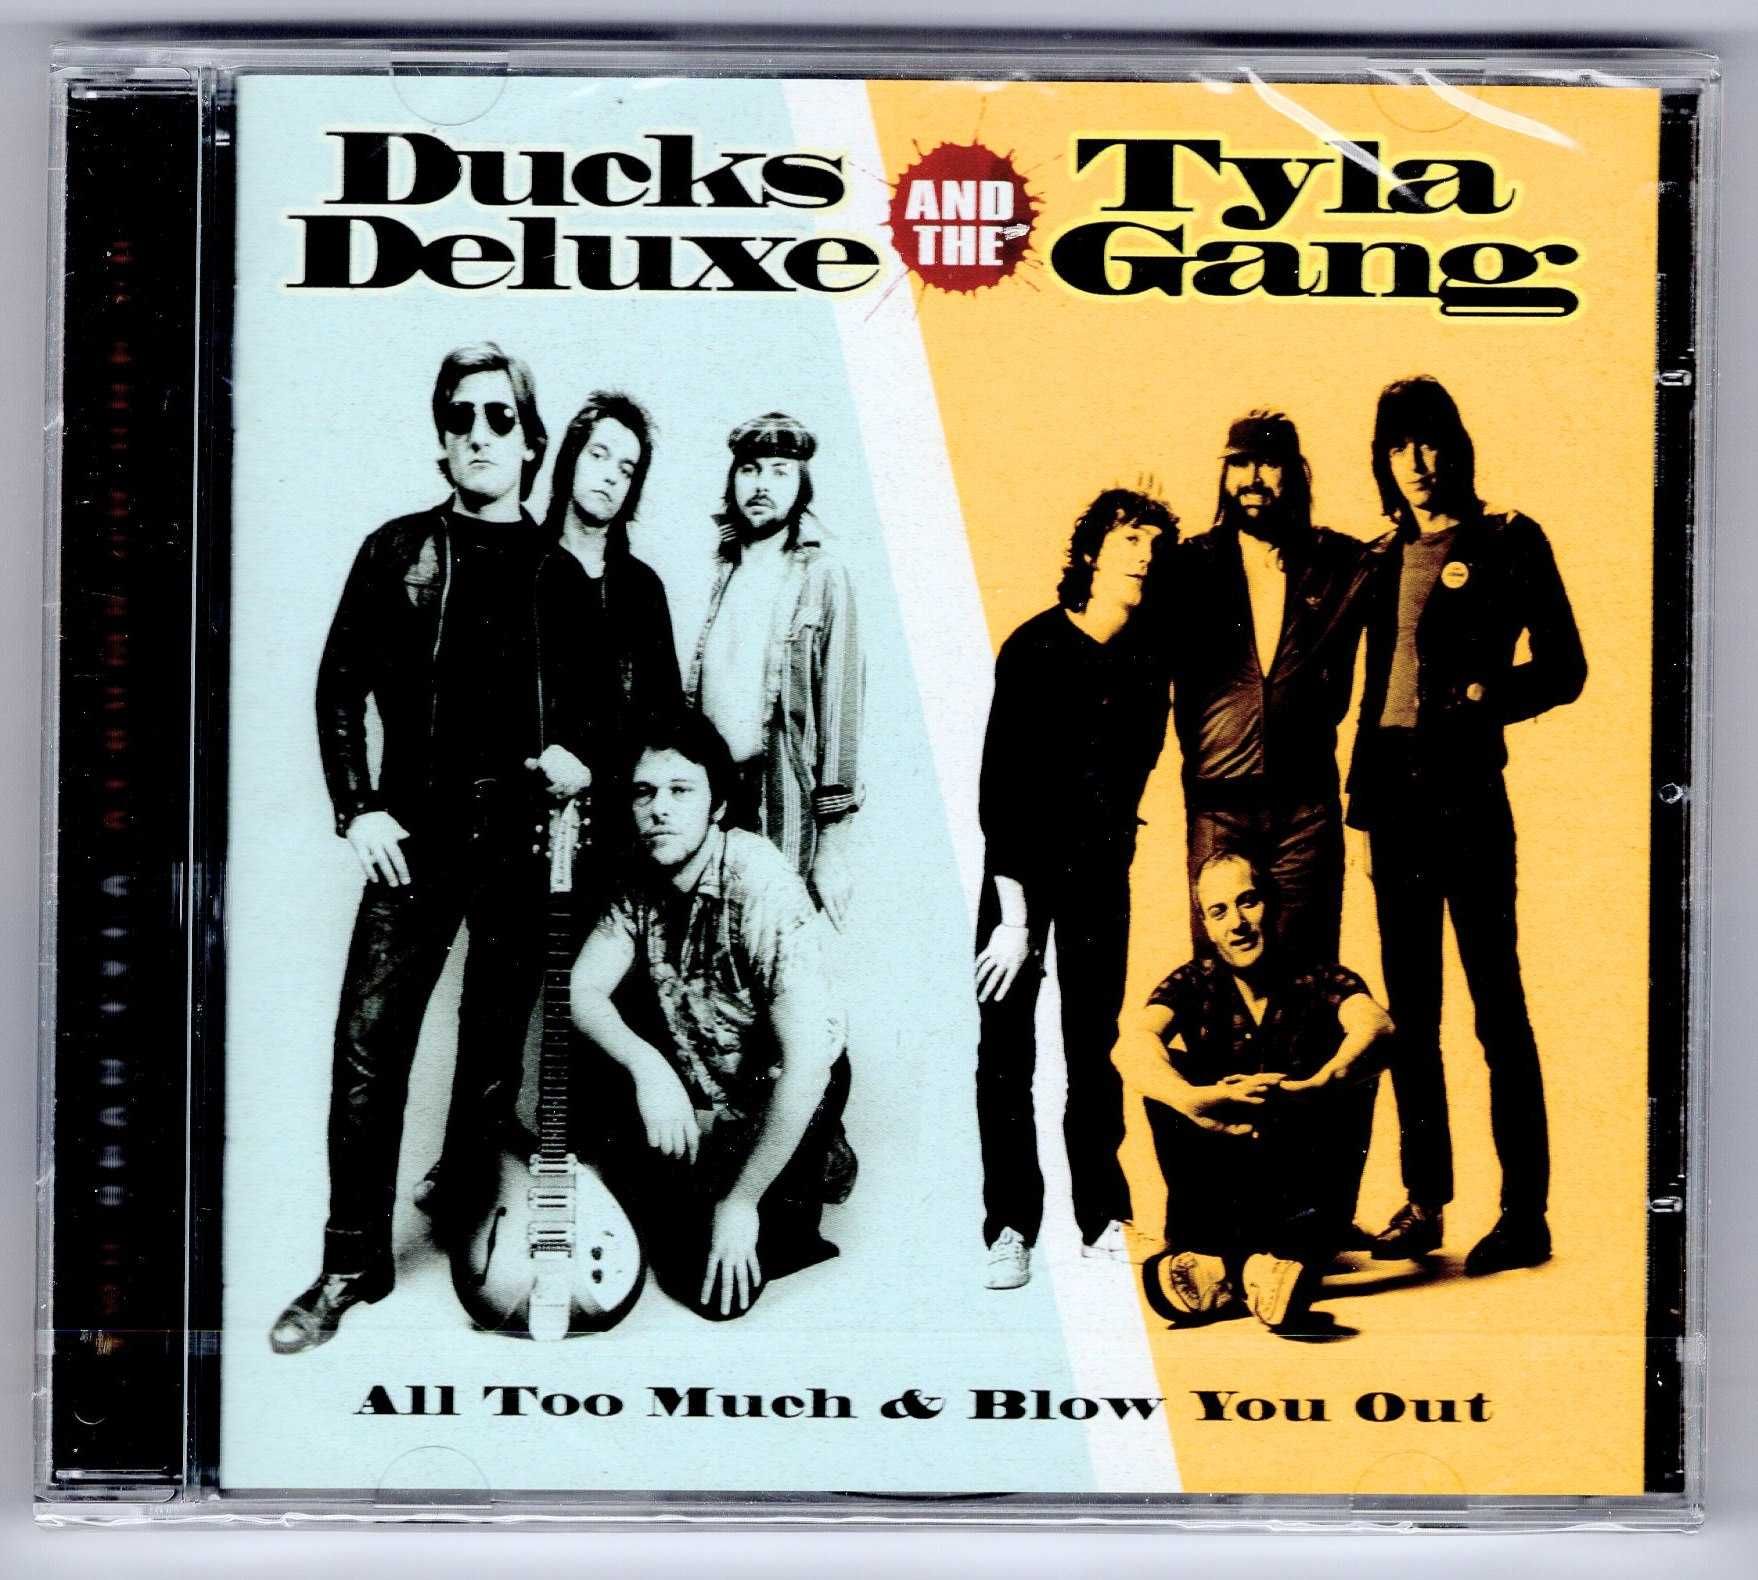 Ducks Deluxe Tyla Gang - All Too Much Blow You Out (CD)